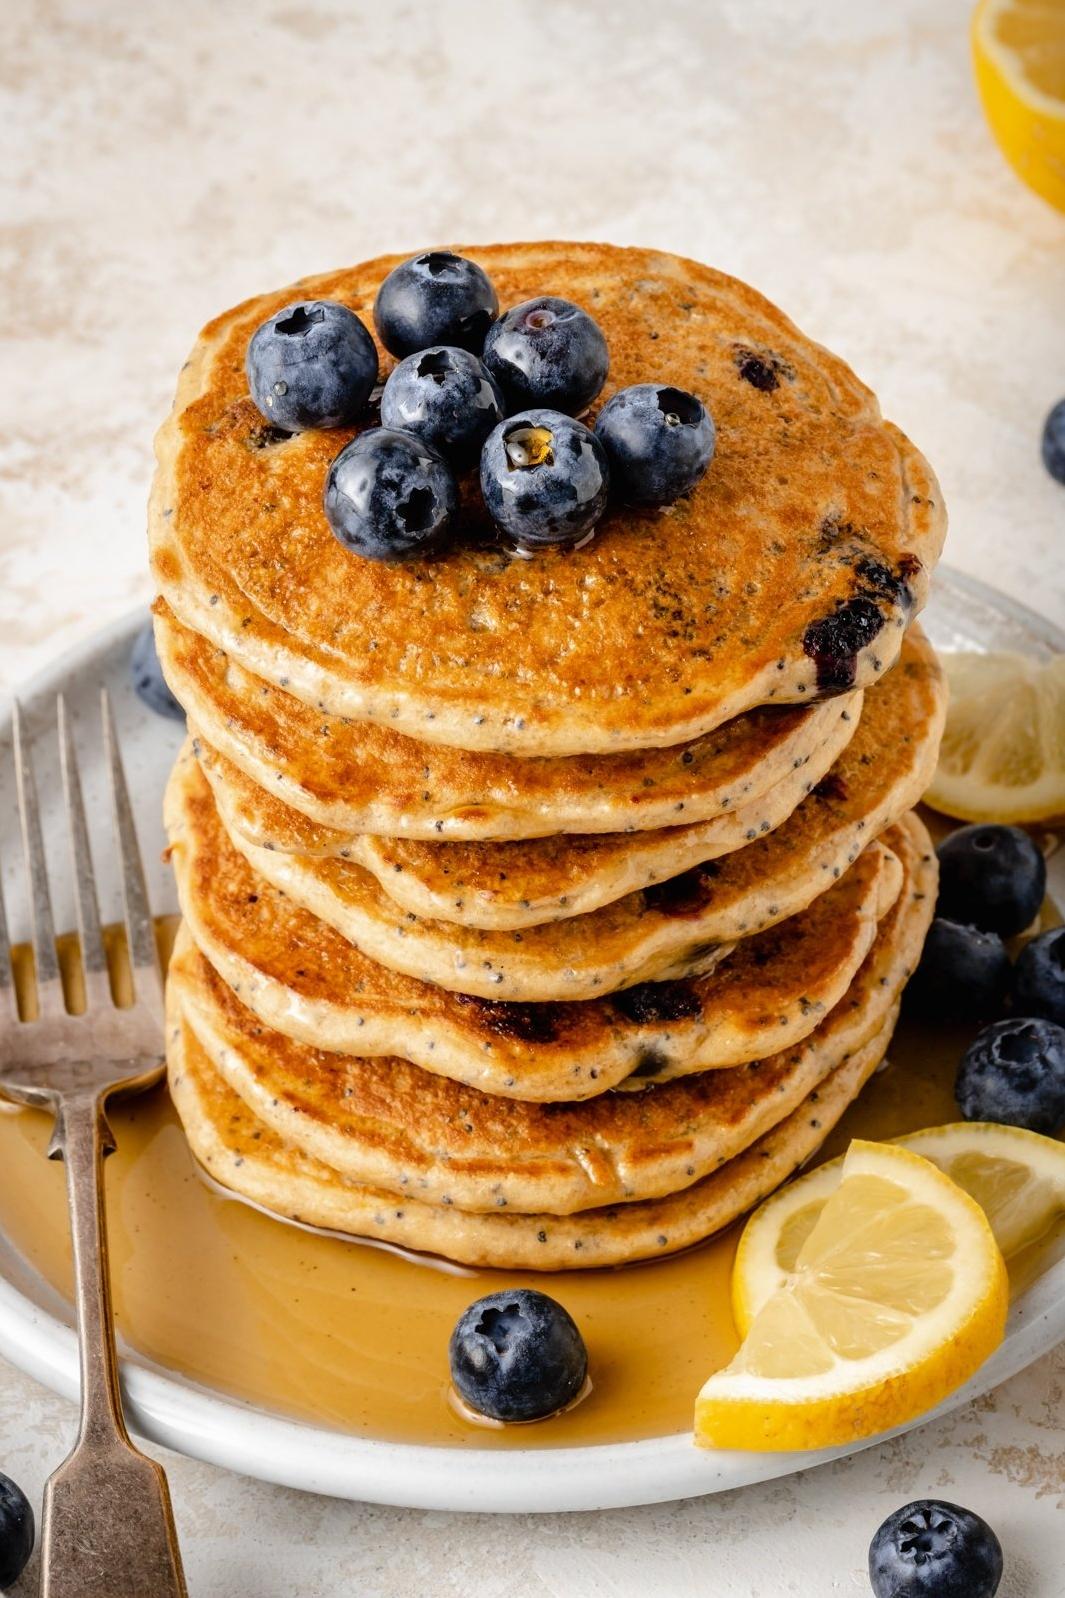  Wake up to a stack of fluffy, gluten-free blueberry pancakes!